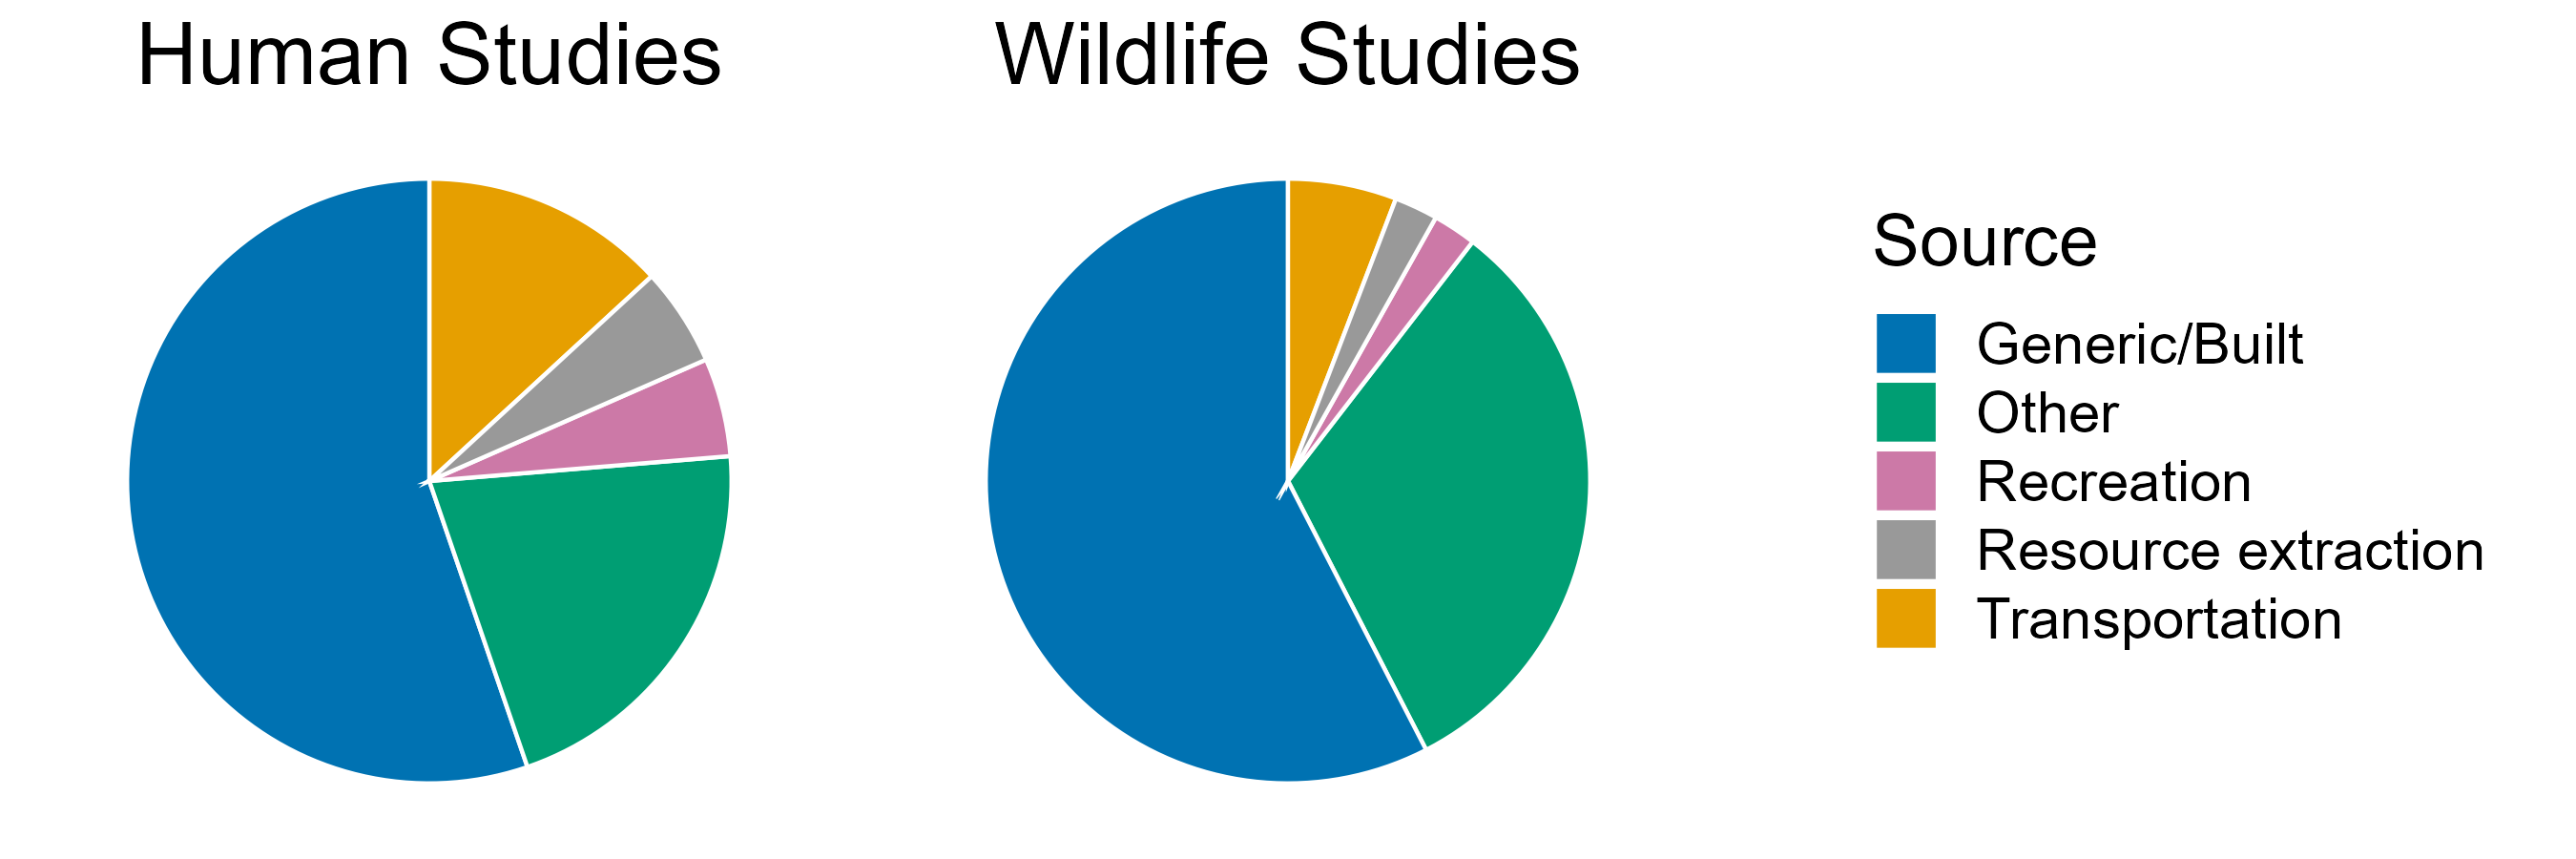 pie graphs showing different type studies on artificial light at night